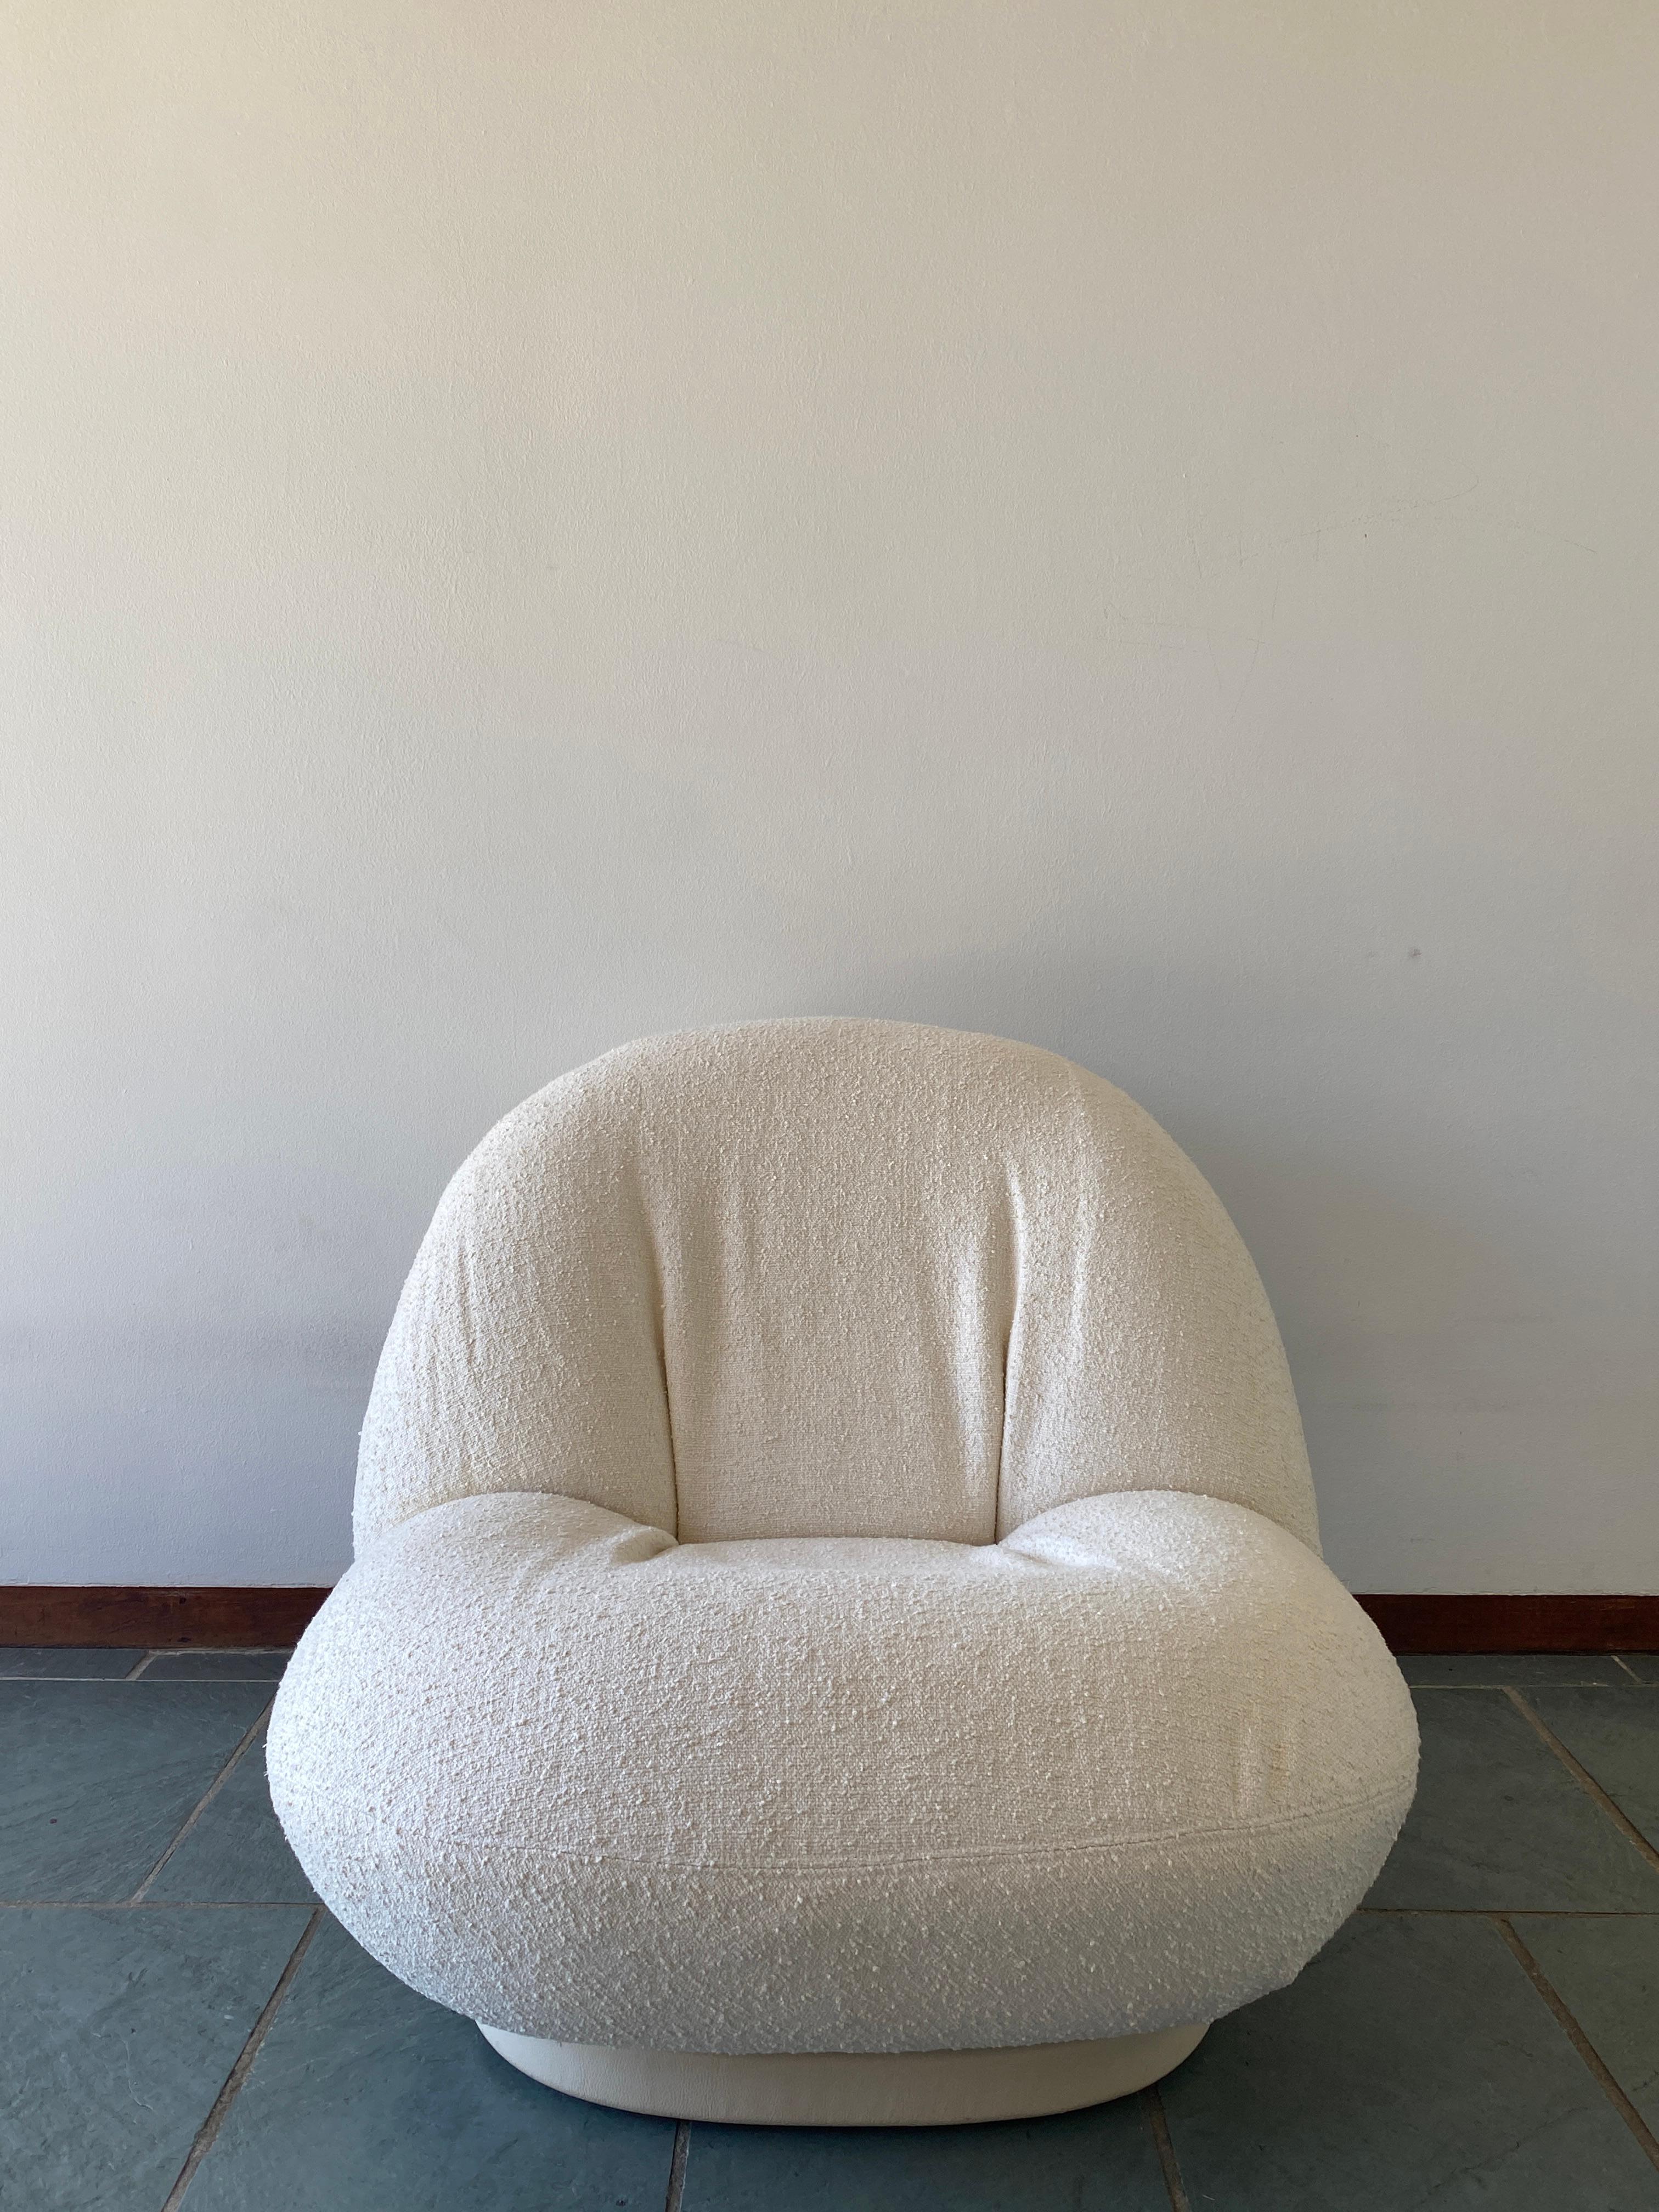 Lovely authentic and original production of the Pacha chair by Pierre Paulin. Offered here as a single chair recently re-uphoslted in a beautiful and chic white Boucle fabric to compliment the white leather base.